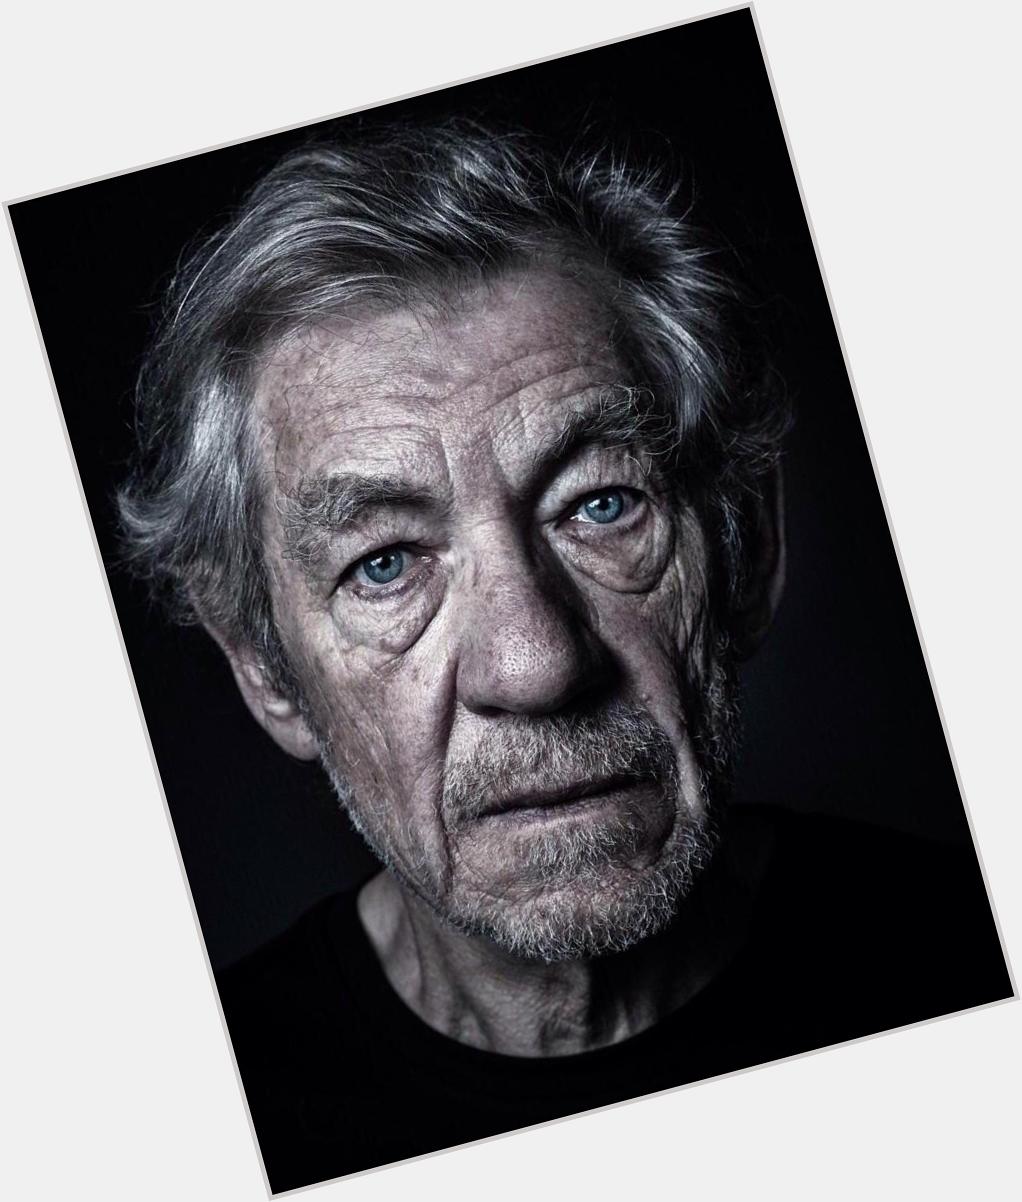 Happy birthday to the legend that is Ian McKellen, one of the absolute greats!! 